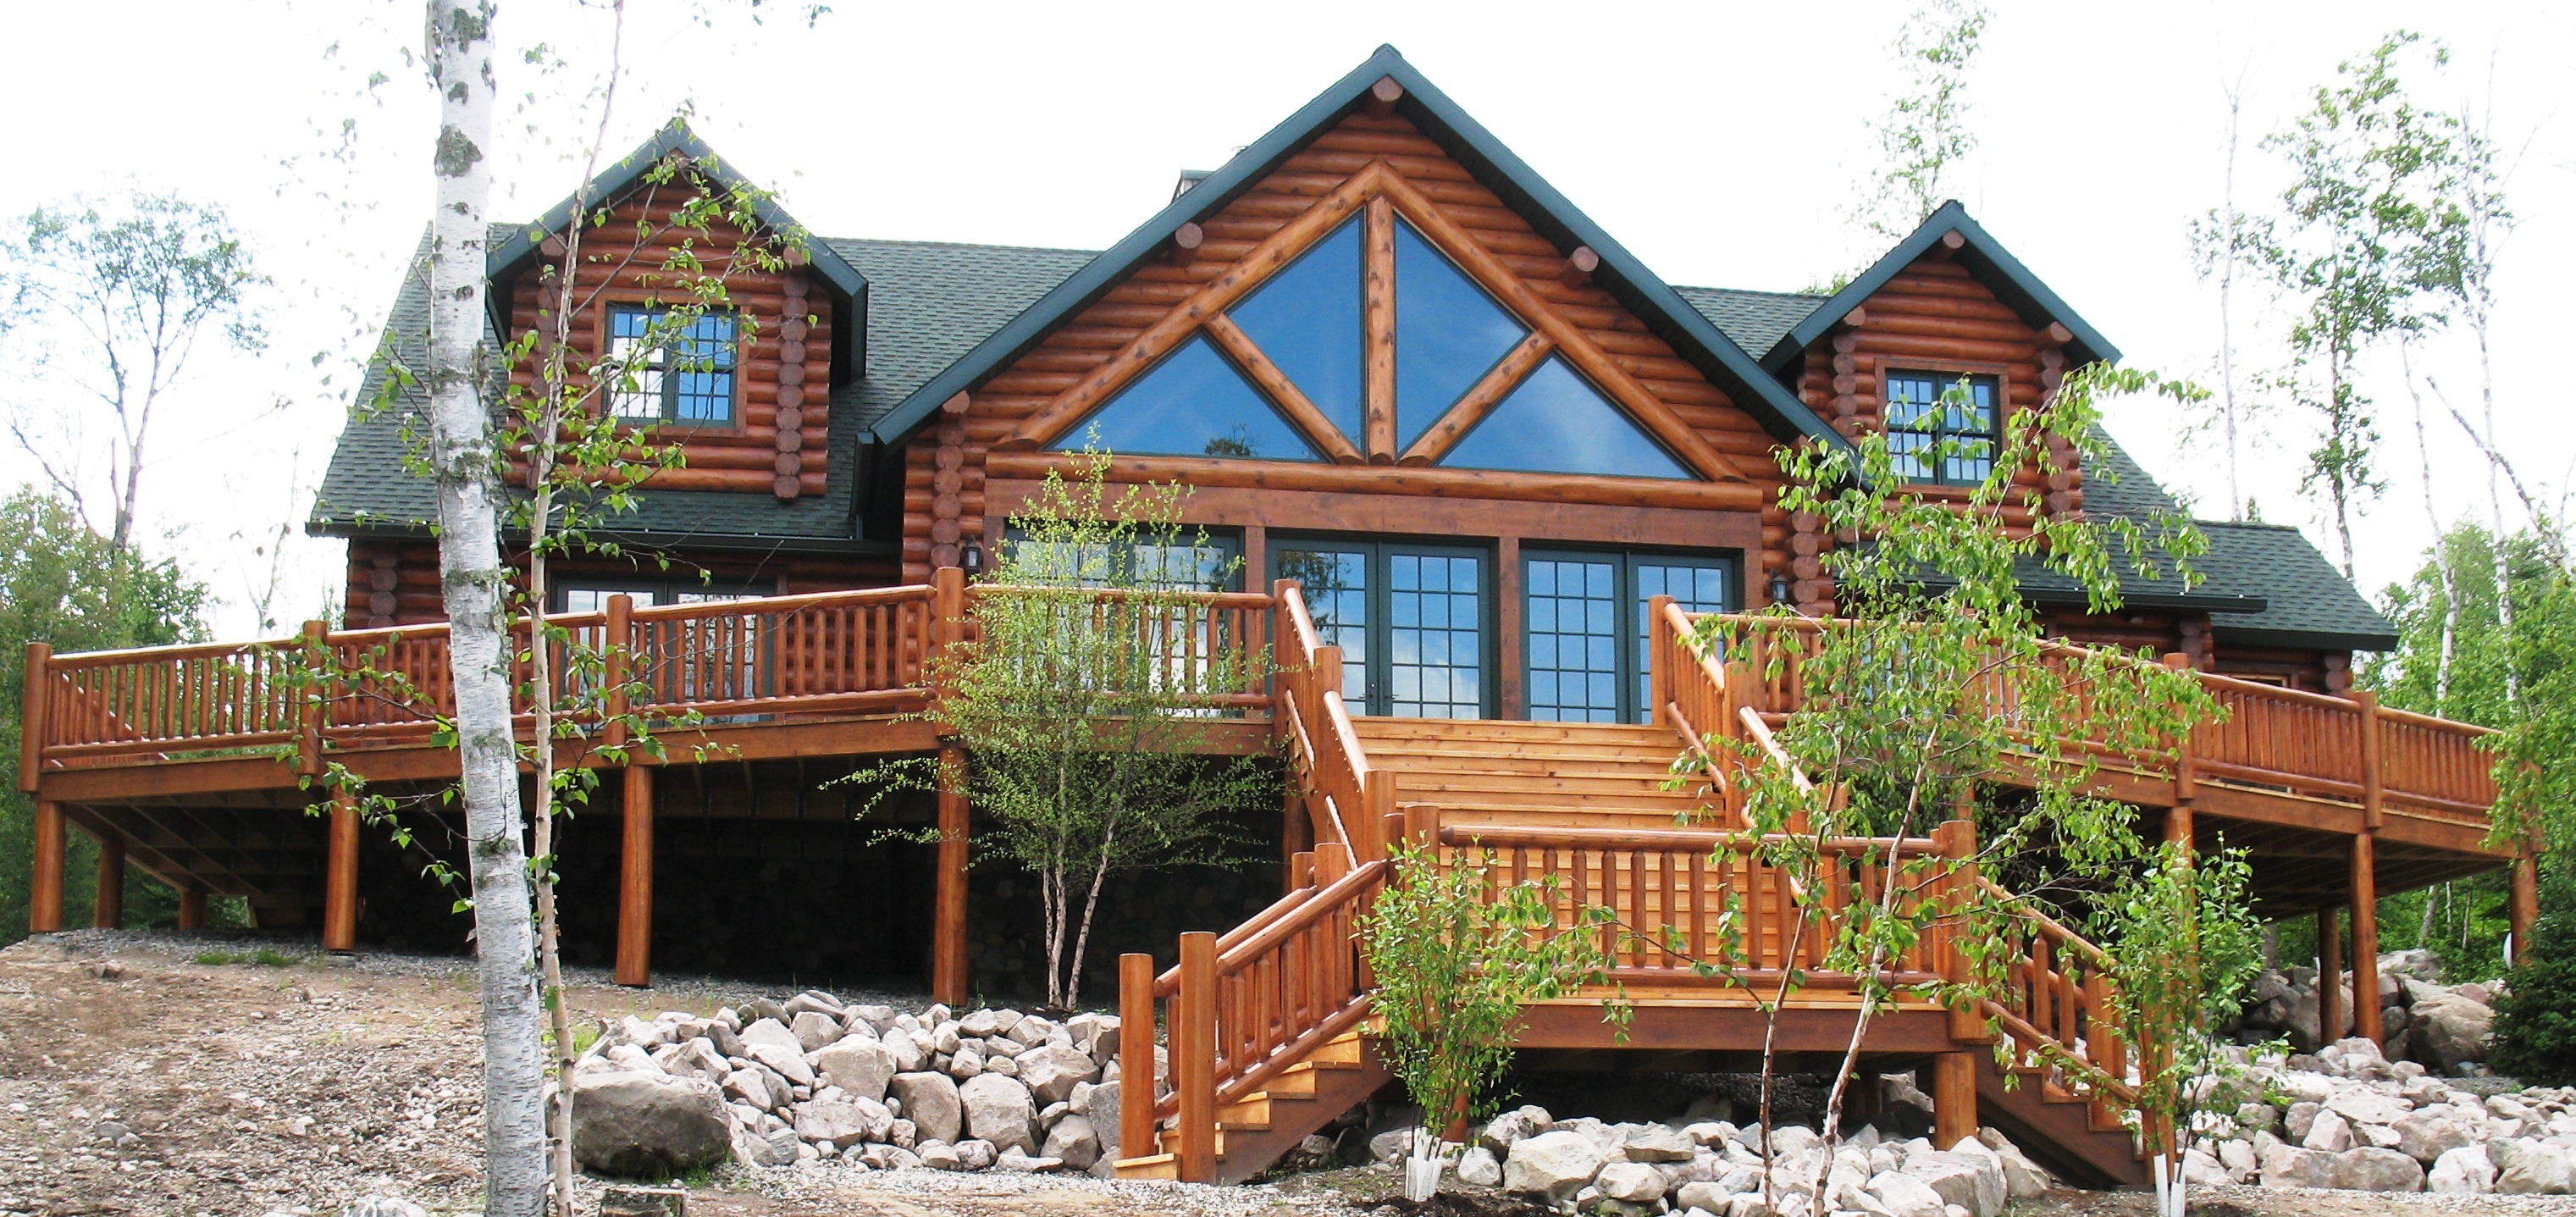 rustic | Log cabin exterior with large wooden deck and grand staircase | Outdoor stair railings